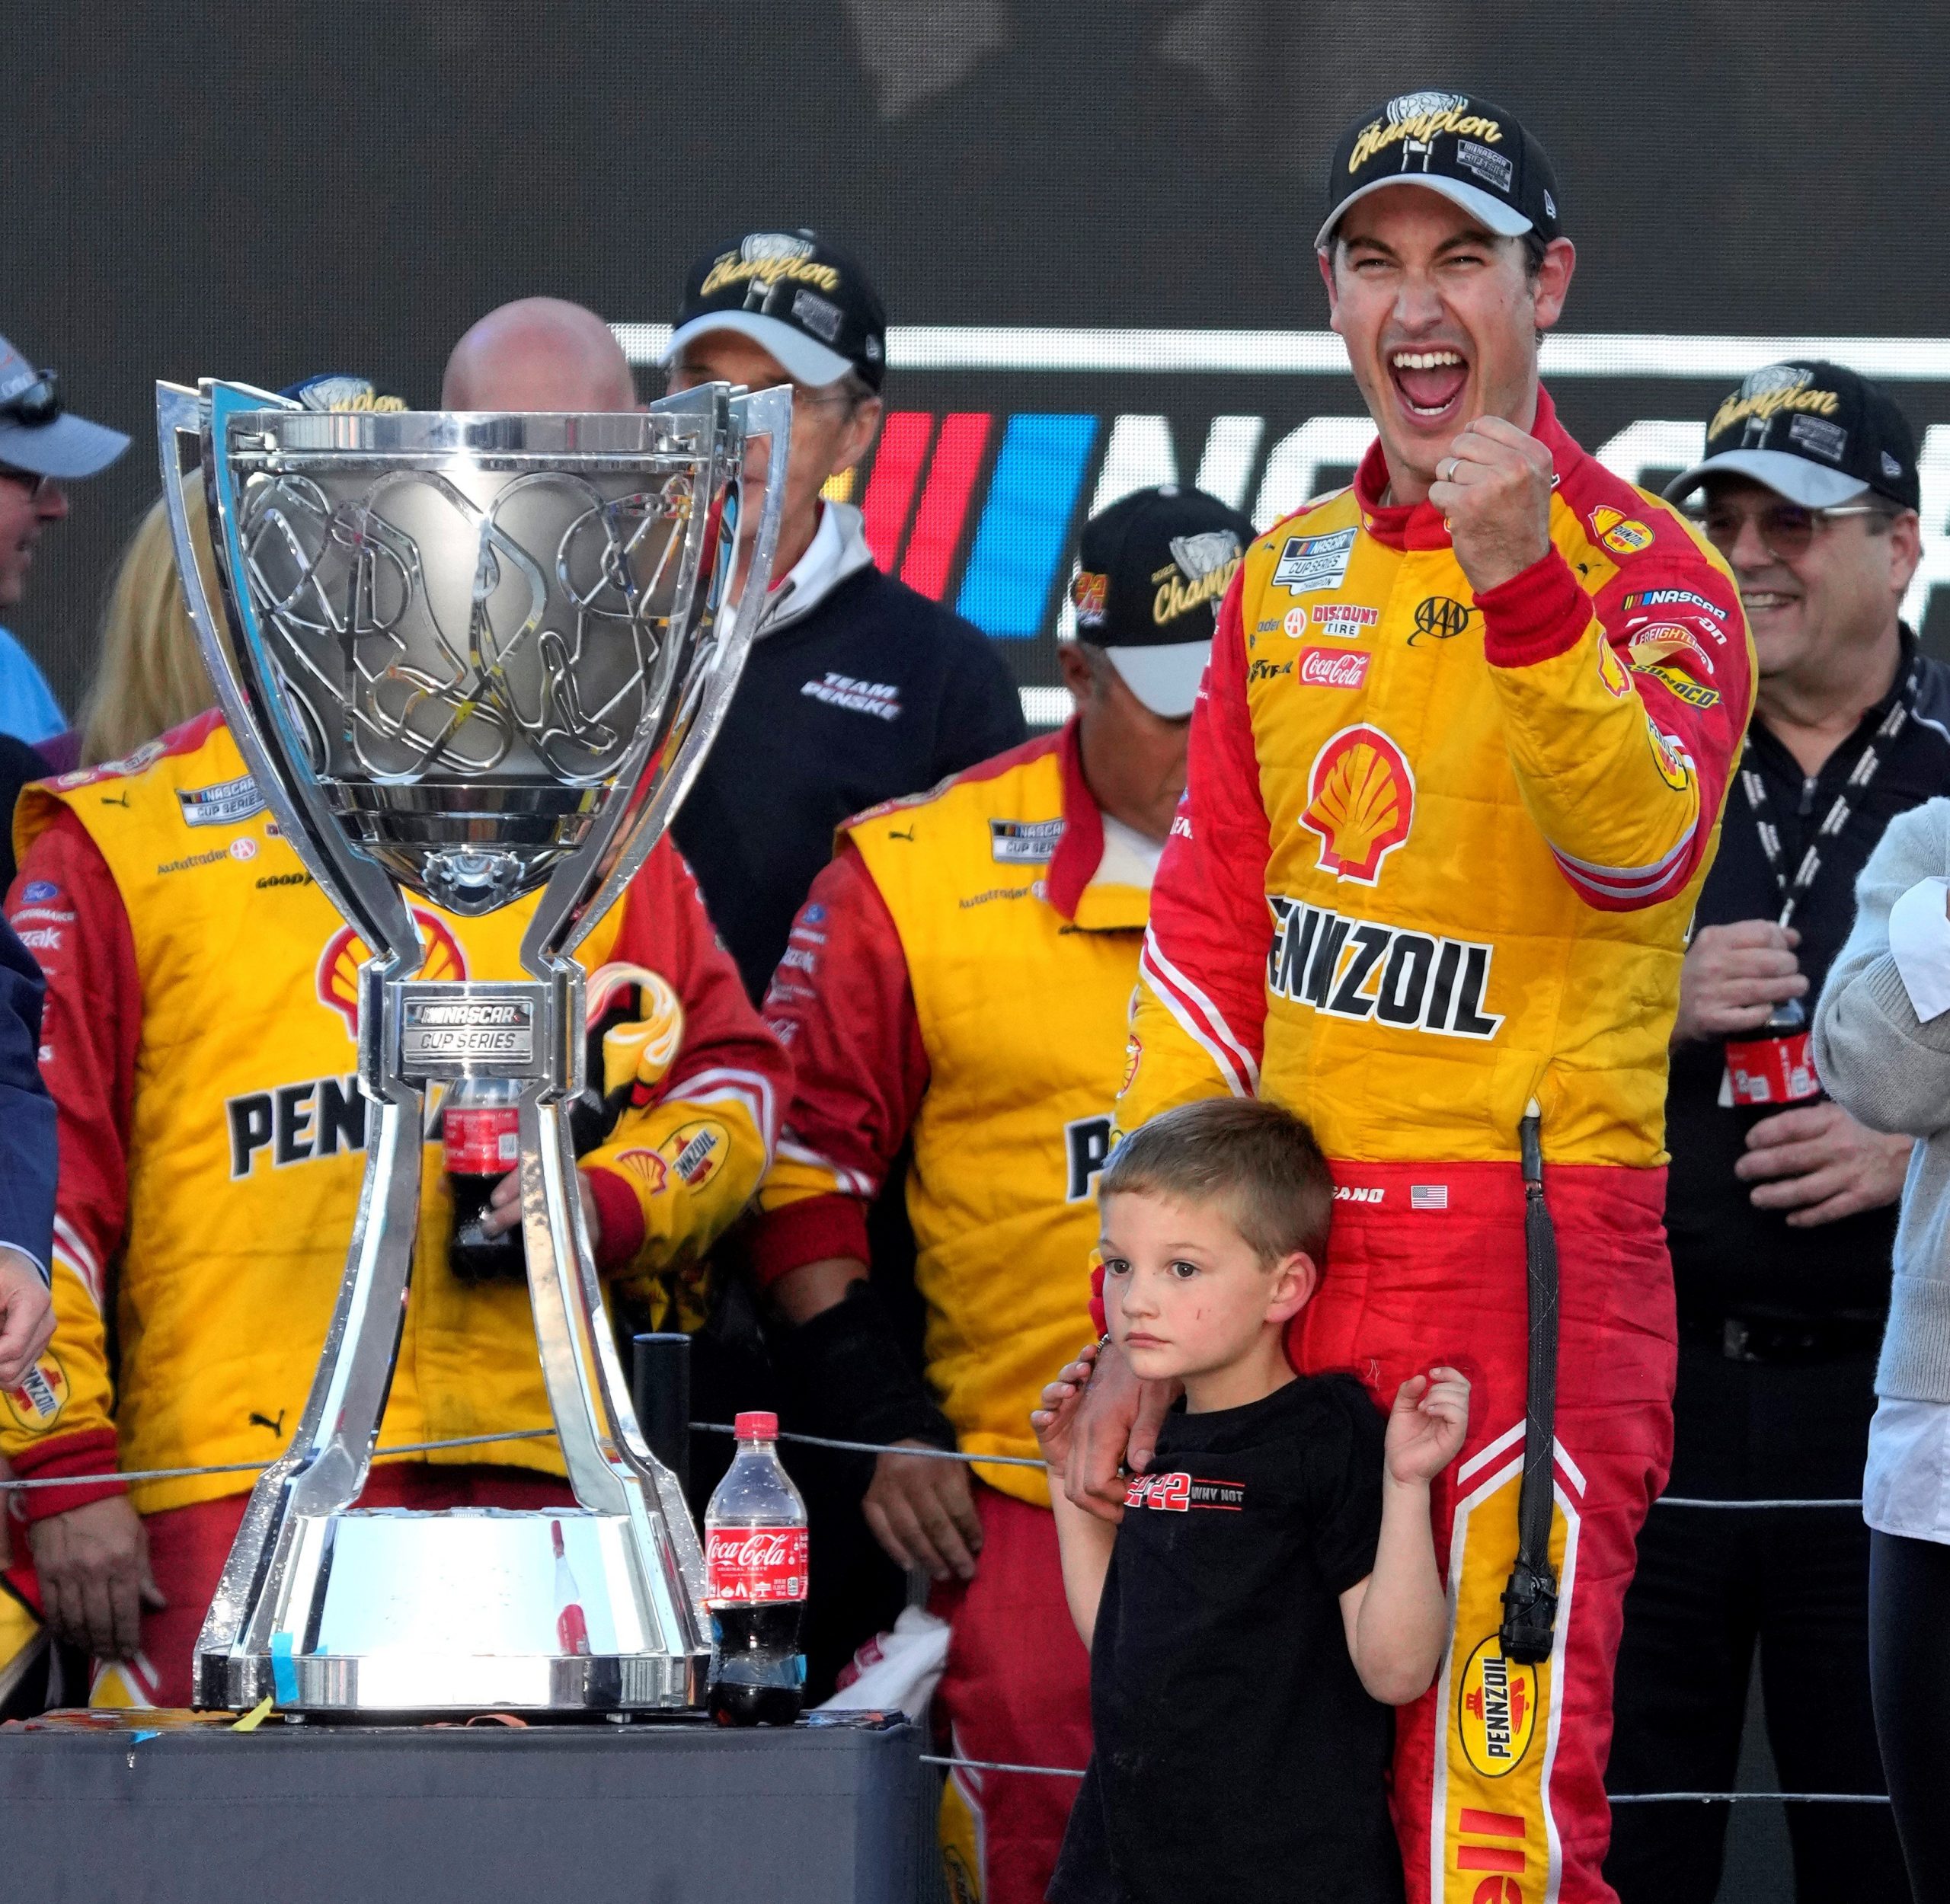 Logano’s NASCAR championship run was fueled by his confidence and experience